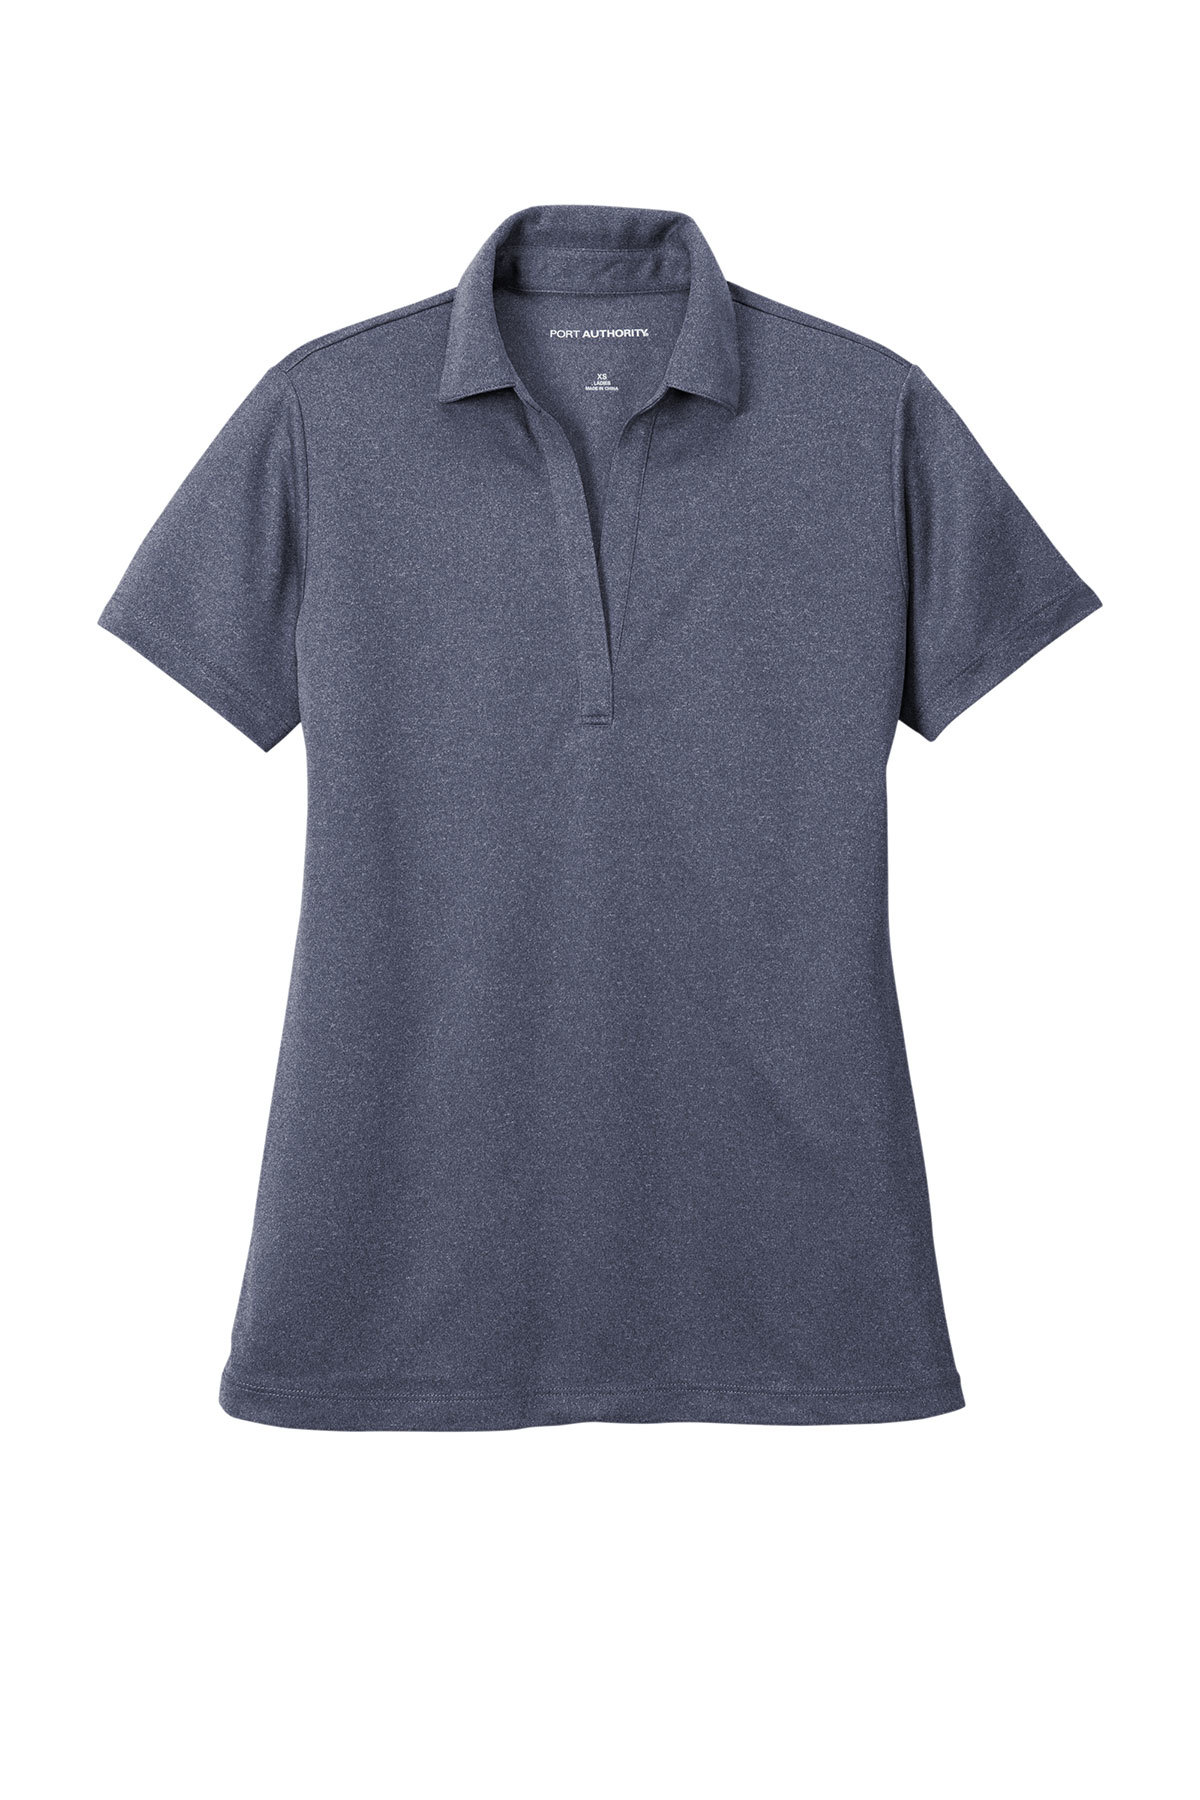 Port Authority Ladies Heathered Silk Touch Performance Polo | Product |  Port Authority